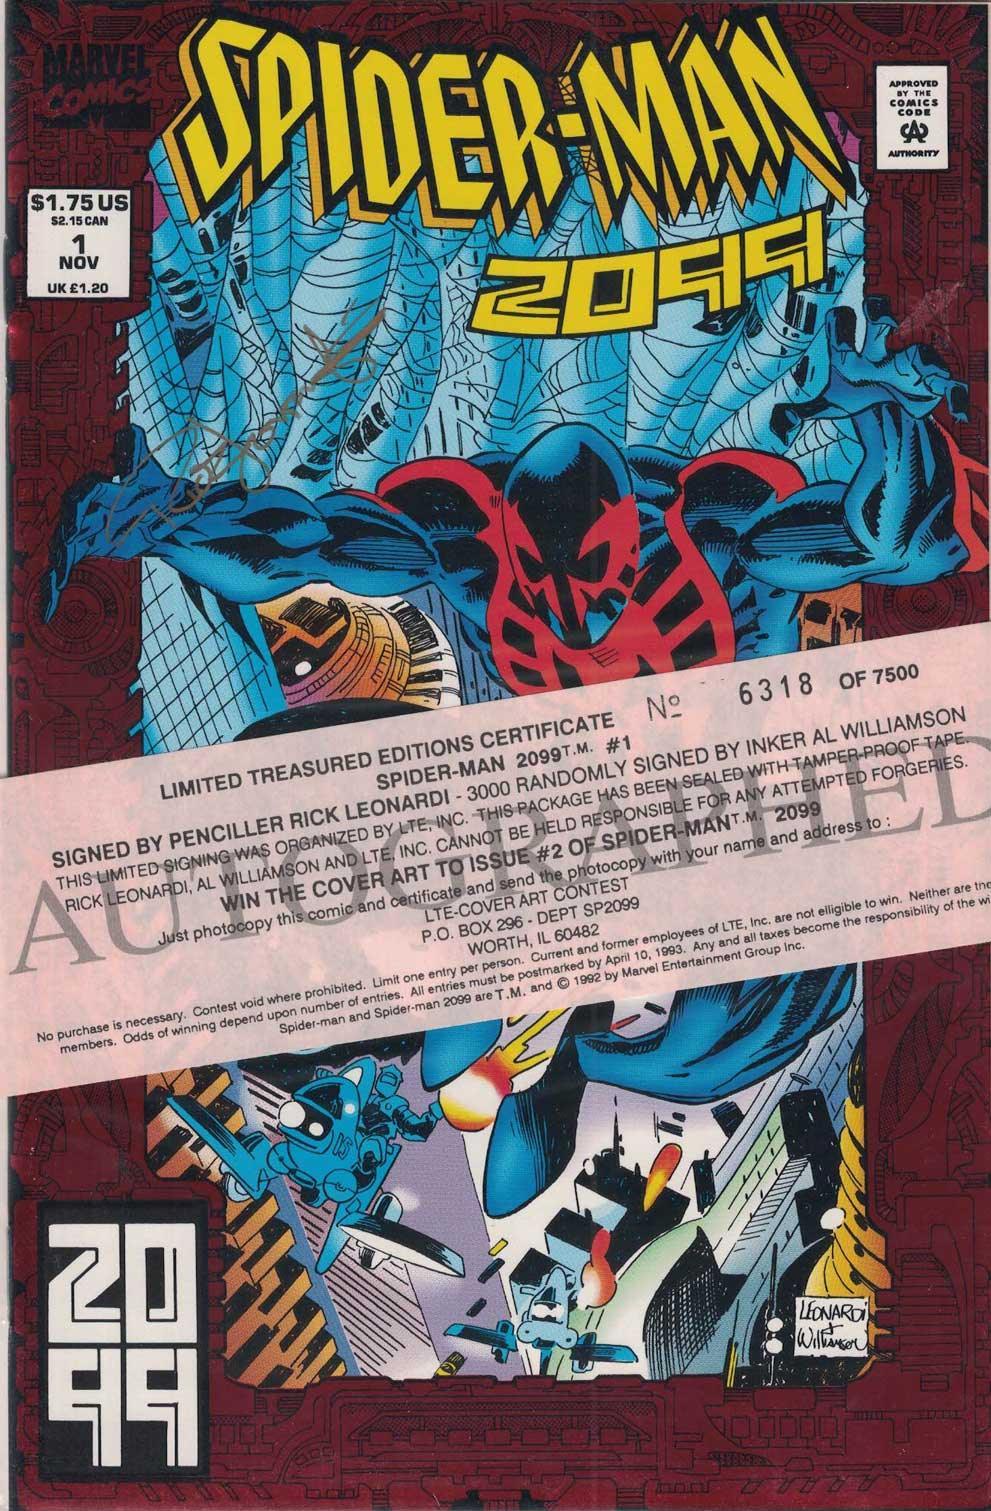 SPIDER-MAN 2099 (1992) #1 FOIL EDITION DOUBLE SIGNED BY RICK LEONARDI AND AL WILLIAMSON - Kings Comics